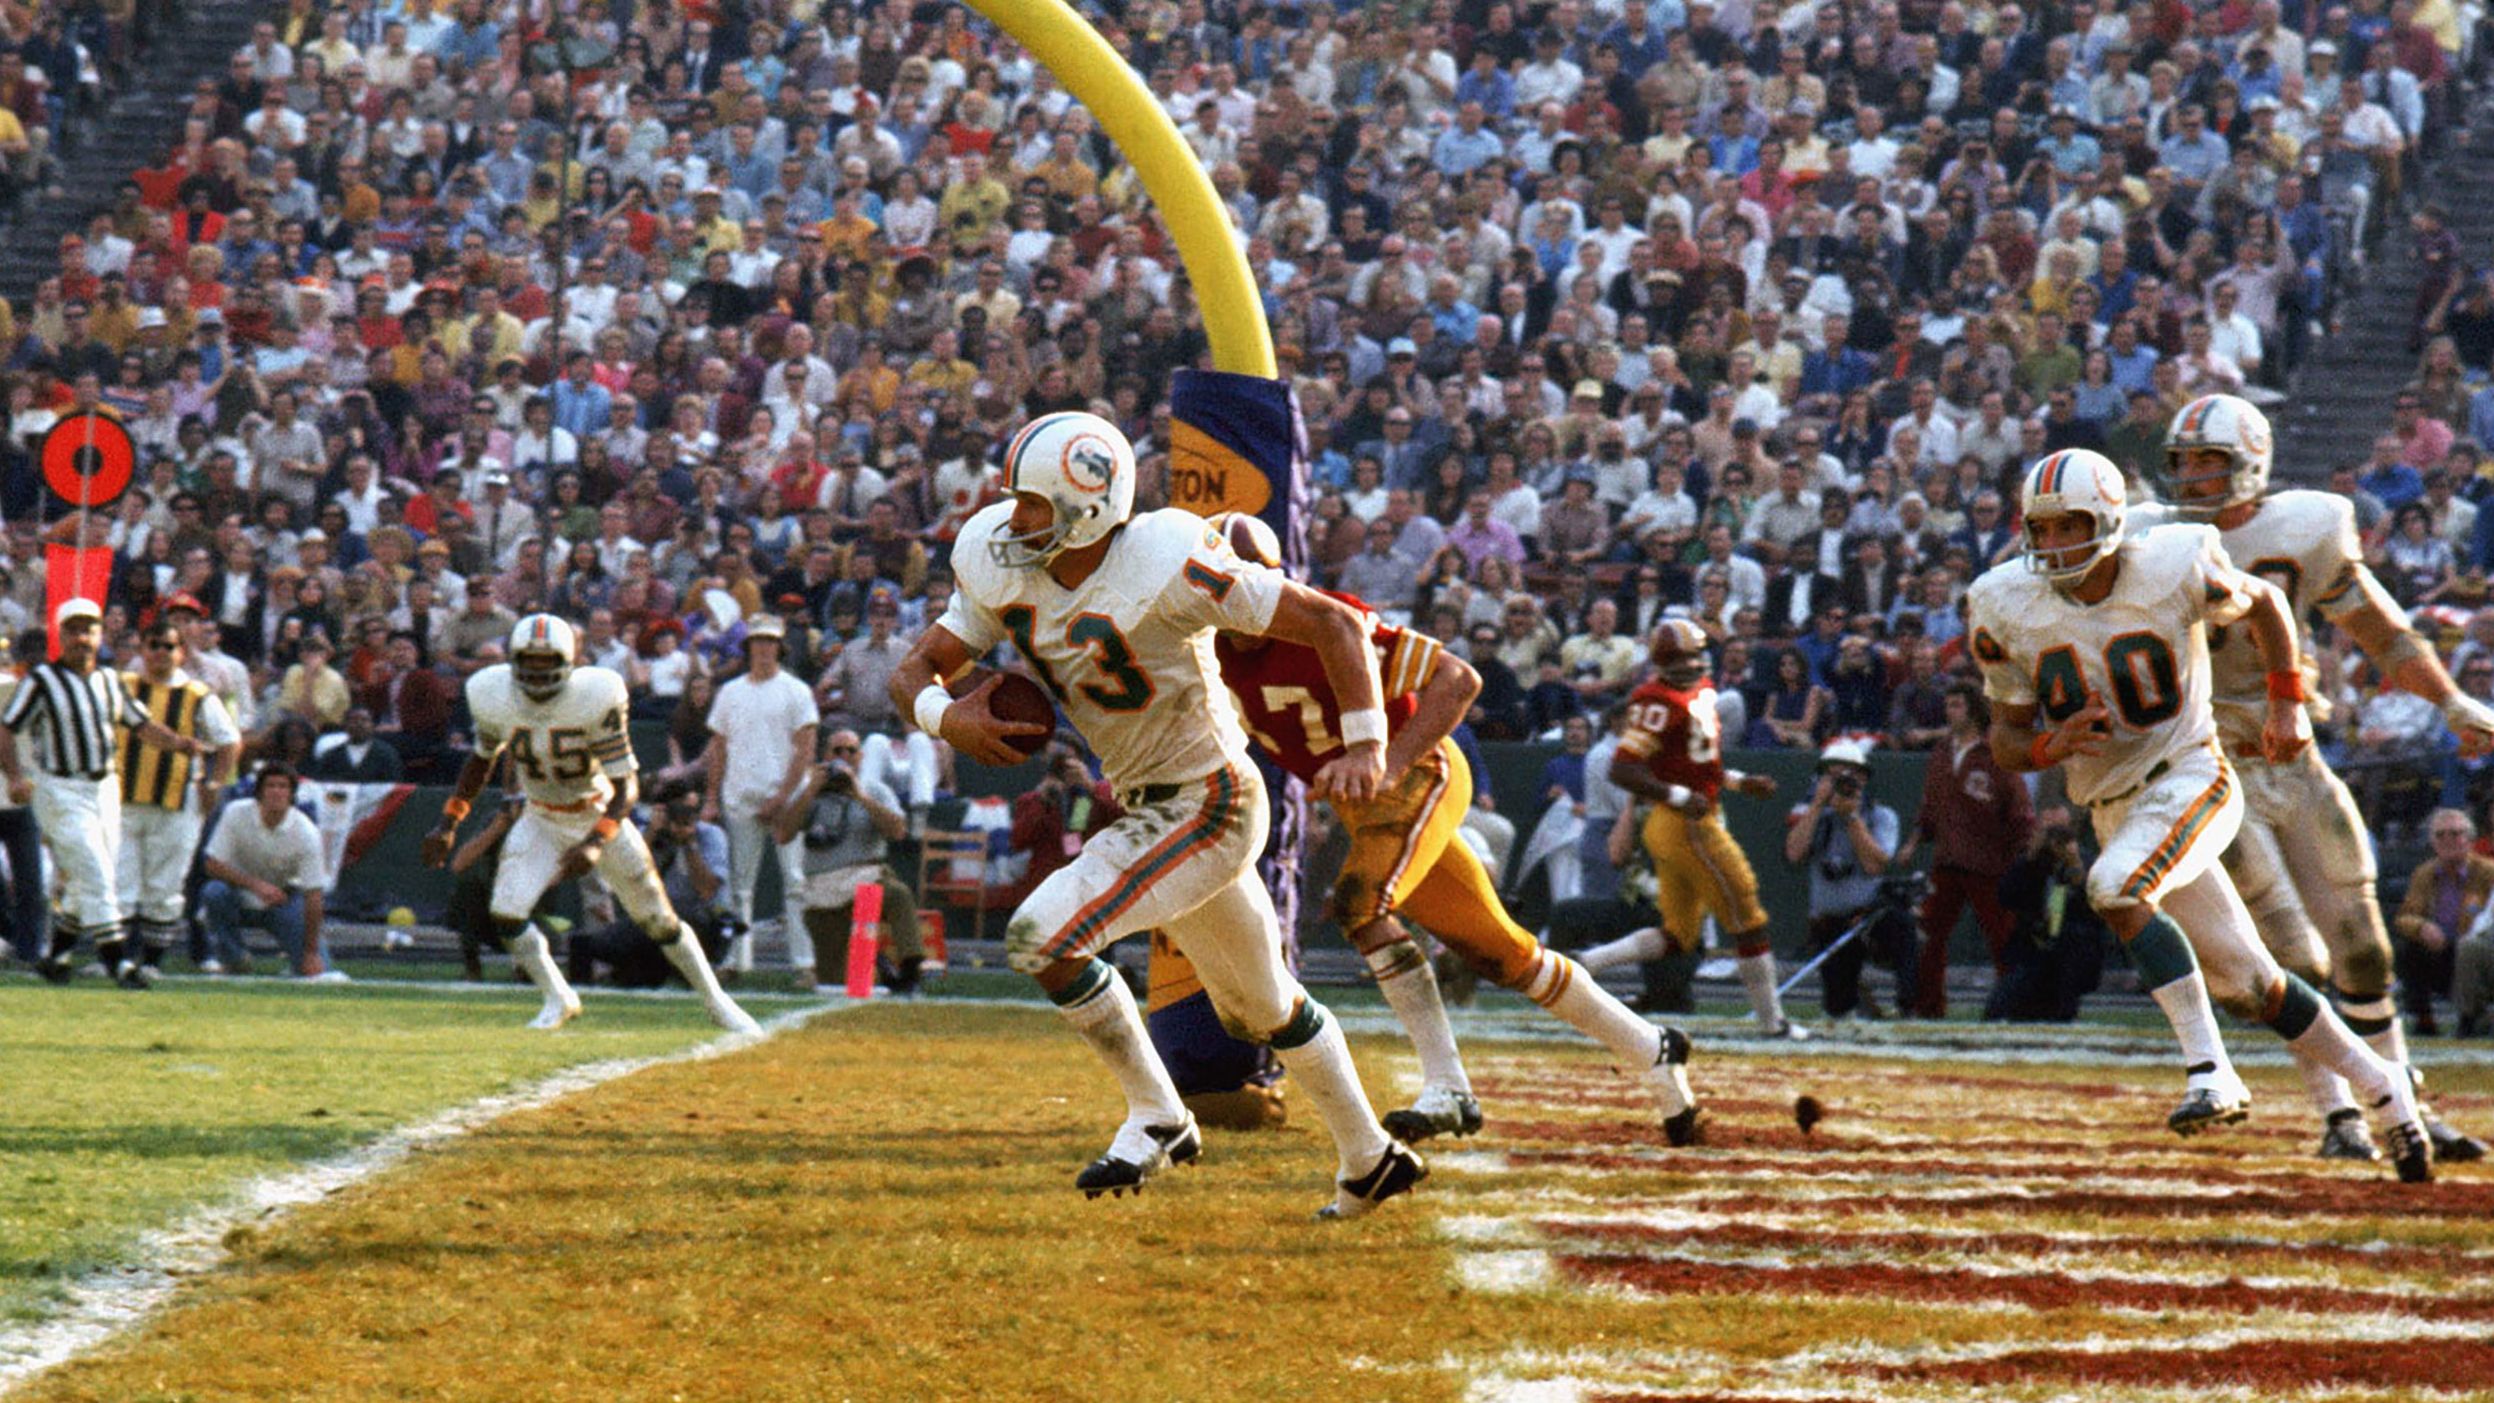 <strong>Super Bowl VII (1973):</strong> Miami safety Jake Scott intercepts a fourth-quarter pass in the end zone during the Dolphins' 14-7 win over Washington in Super Bowl VII. Scott had two interceptions in the game as the Dolphins finished their season with a perfect 17-0 record. They are still the only NFL team ever to finish a season undefeated.